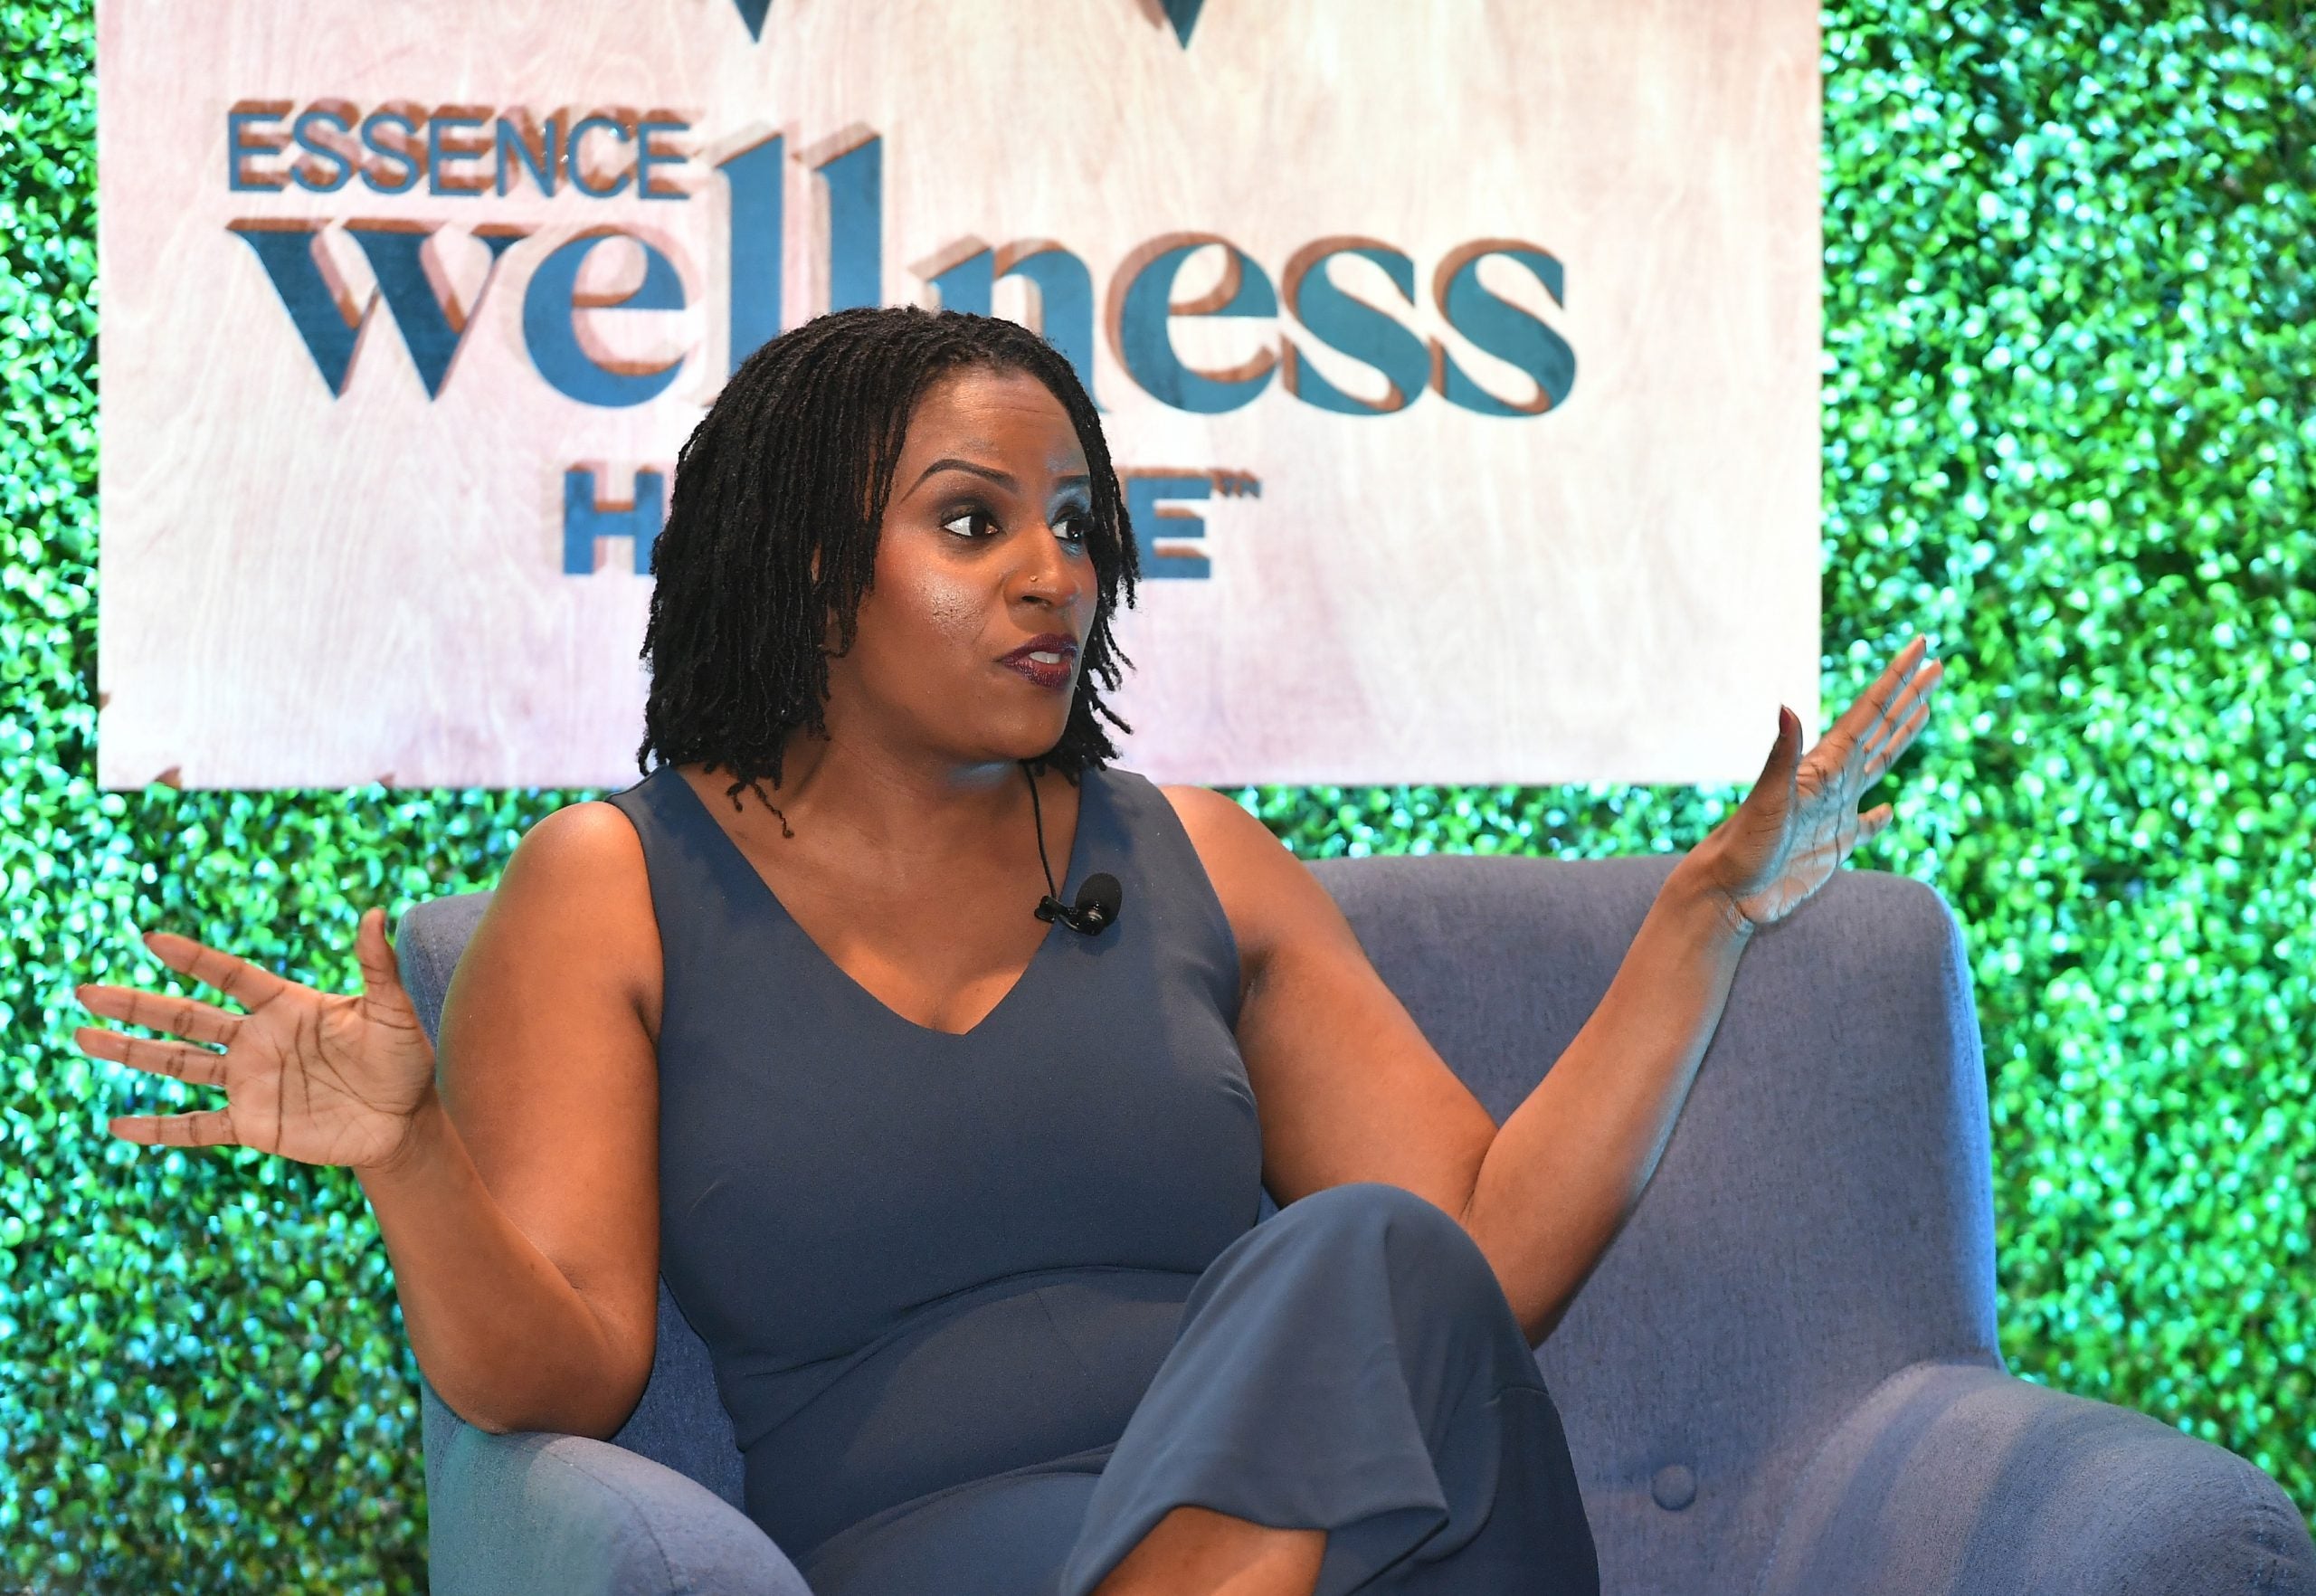 These Powerful Women Schooled Us About Setting Boundaries At ESSENCE Wellness House